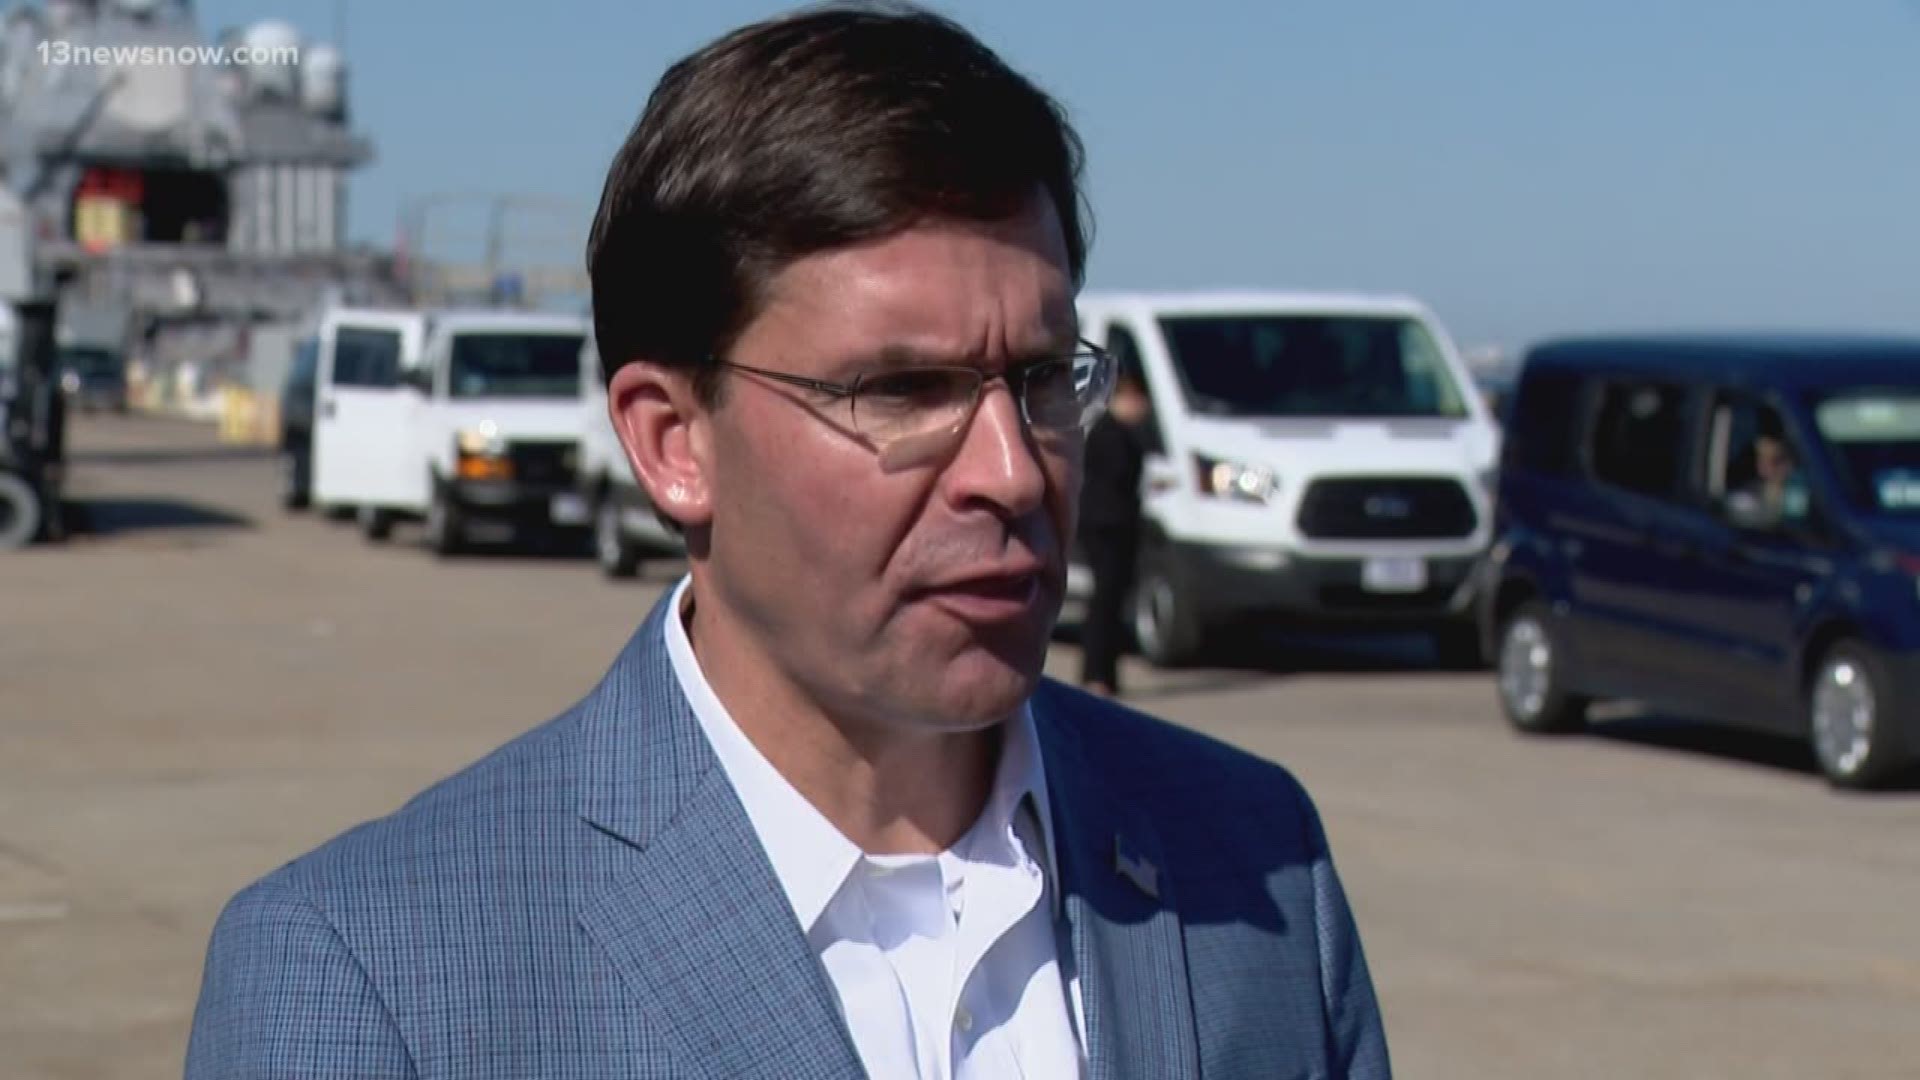 Secretary of Defense Mark Esper said stopping suicide in the military is a top priority. This comes after the Navy confirmed the suicides of three sailors.